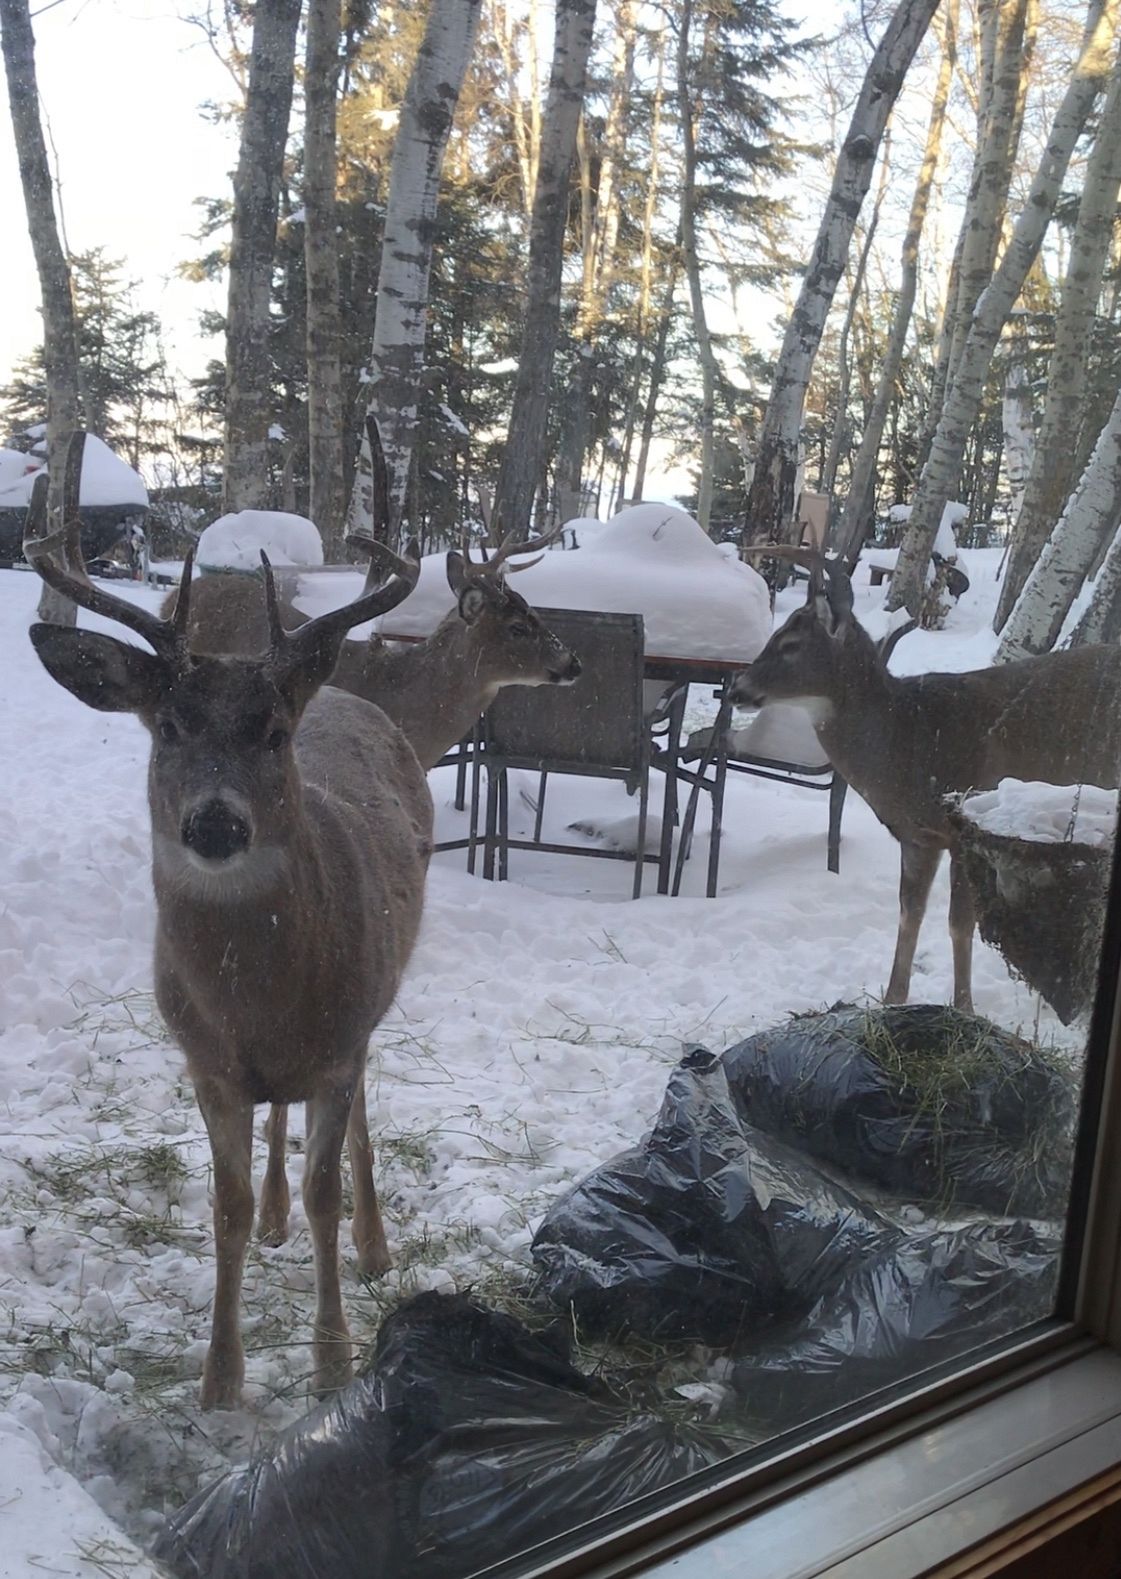 The bucks came right into our deck